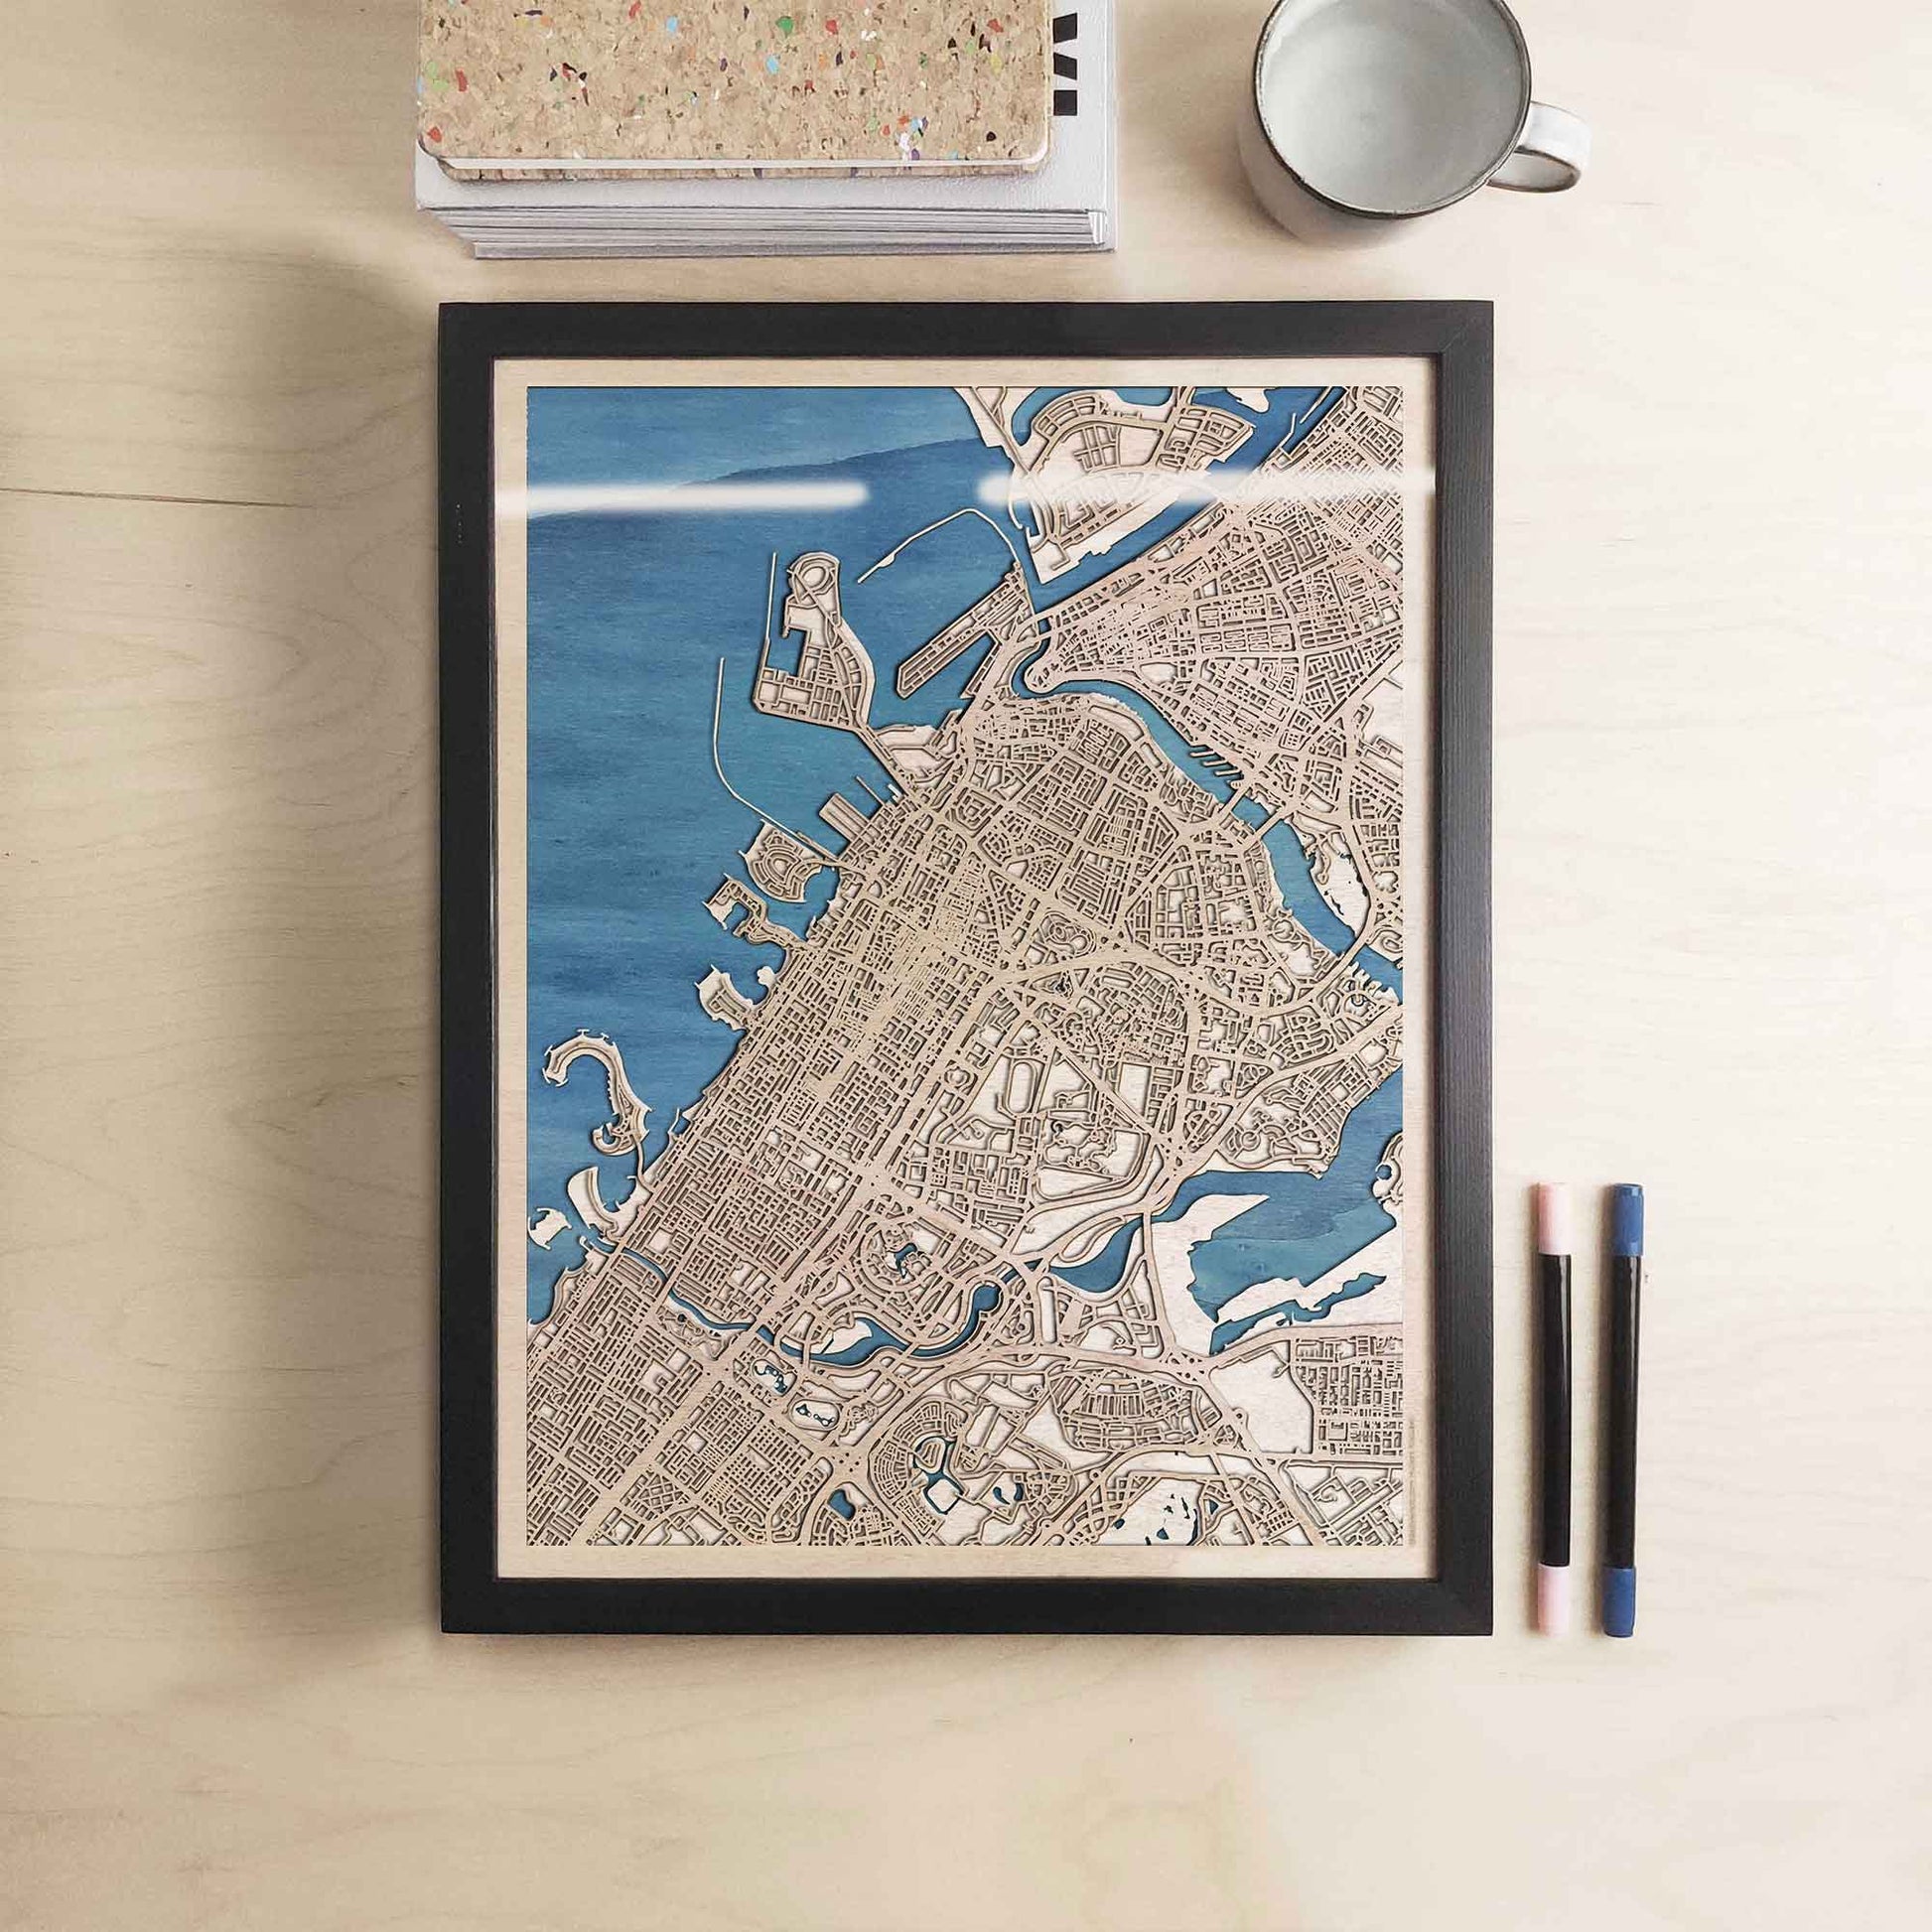 Dubai Wooden Map by CityWood - Custom Wood Map Art - Unique Laser Cut Engraved - Anniversary Gift